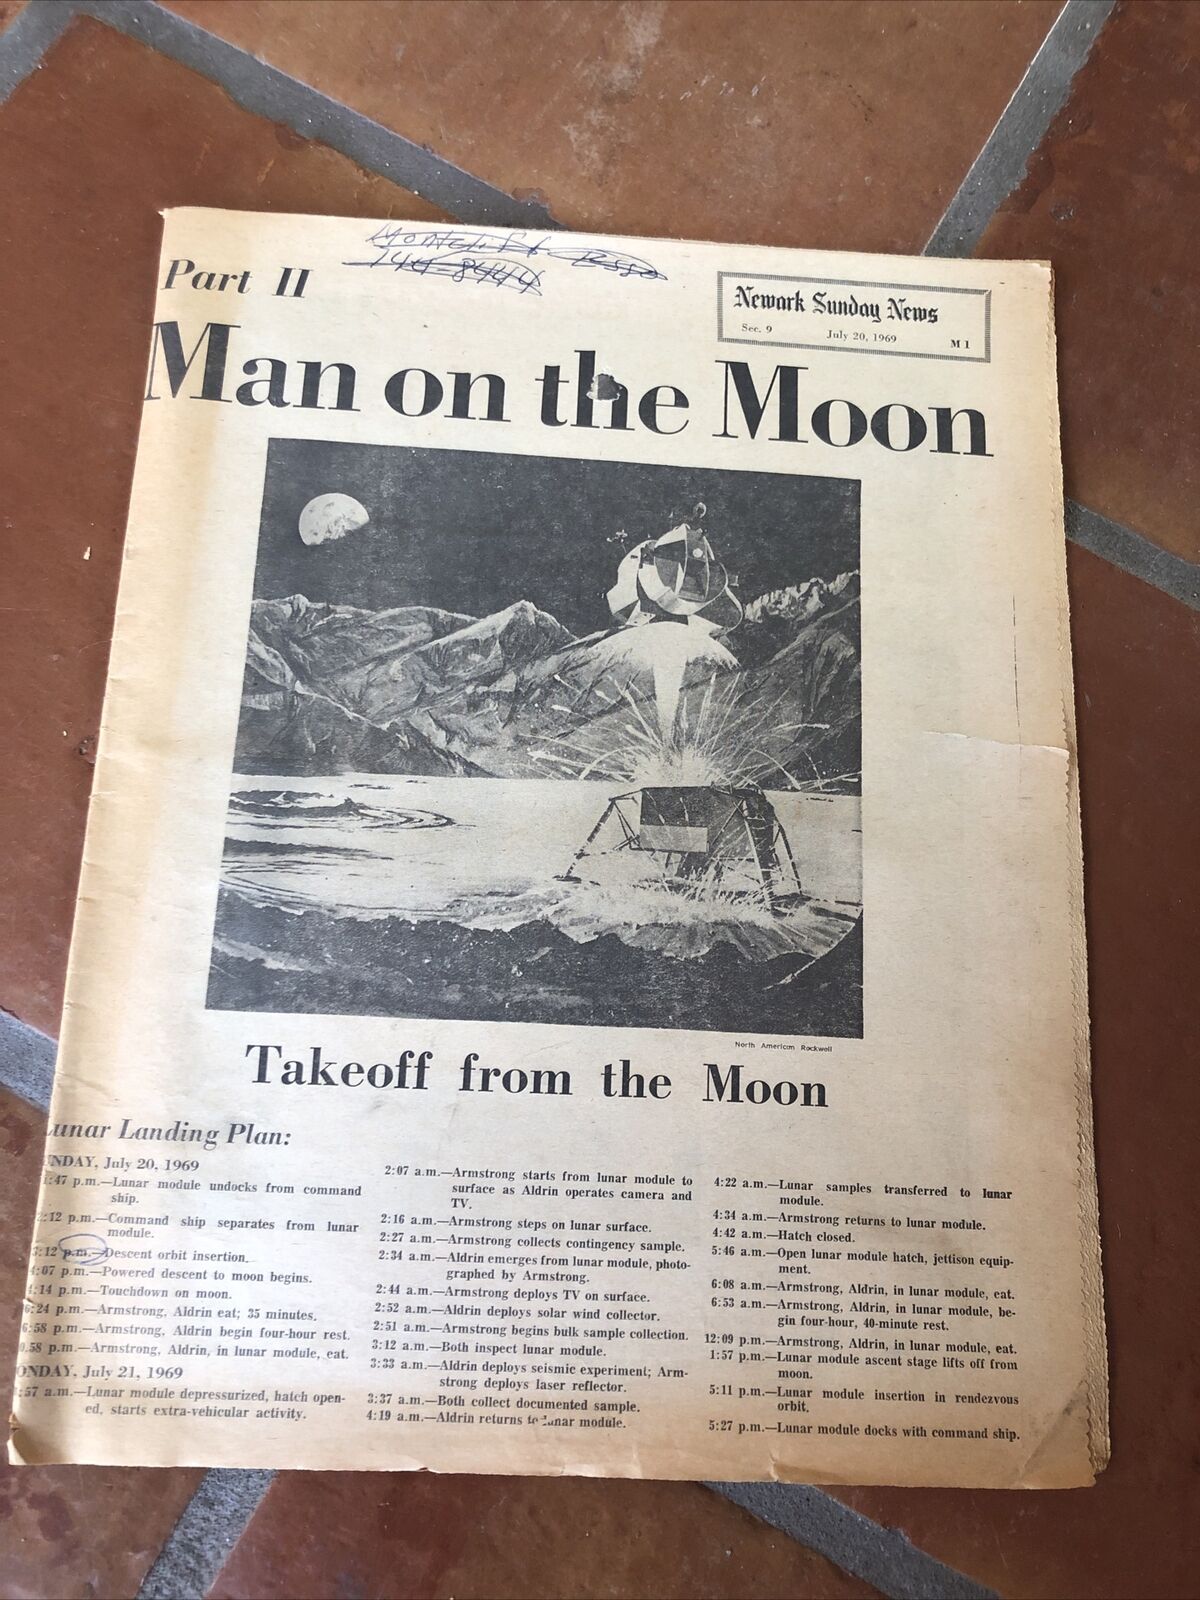 Newark Sunday News July 20, 1969 Man on the Moon special section. Neil Armstrong